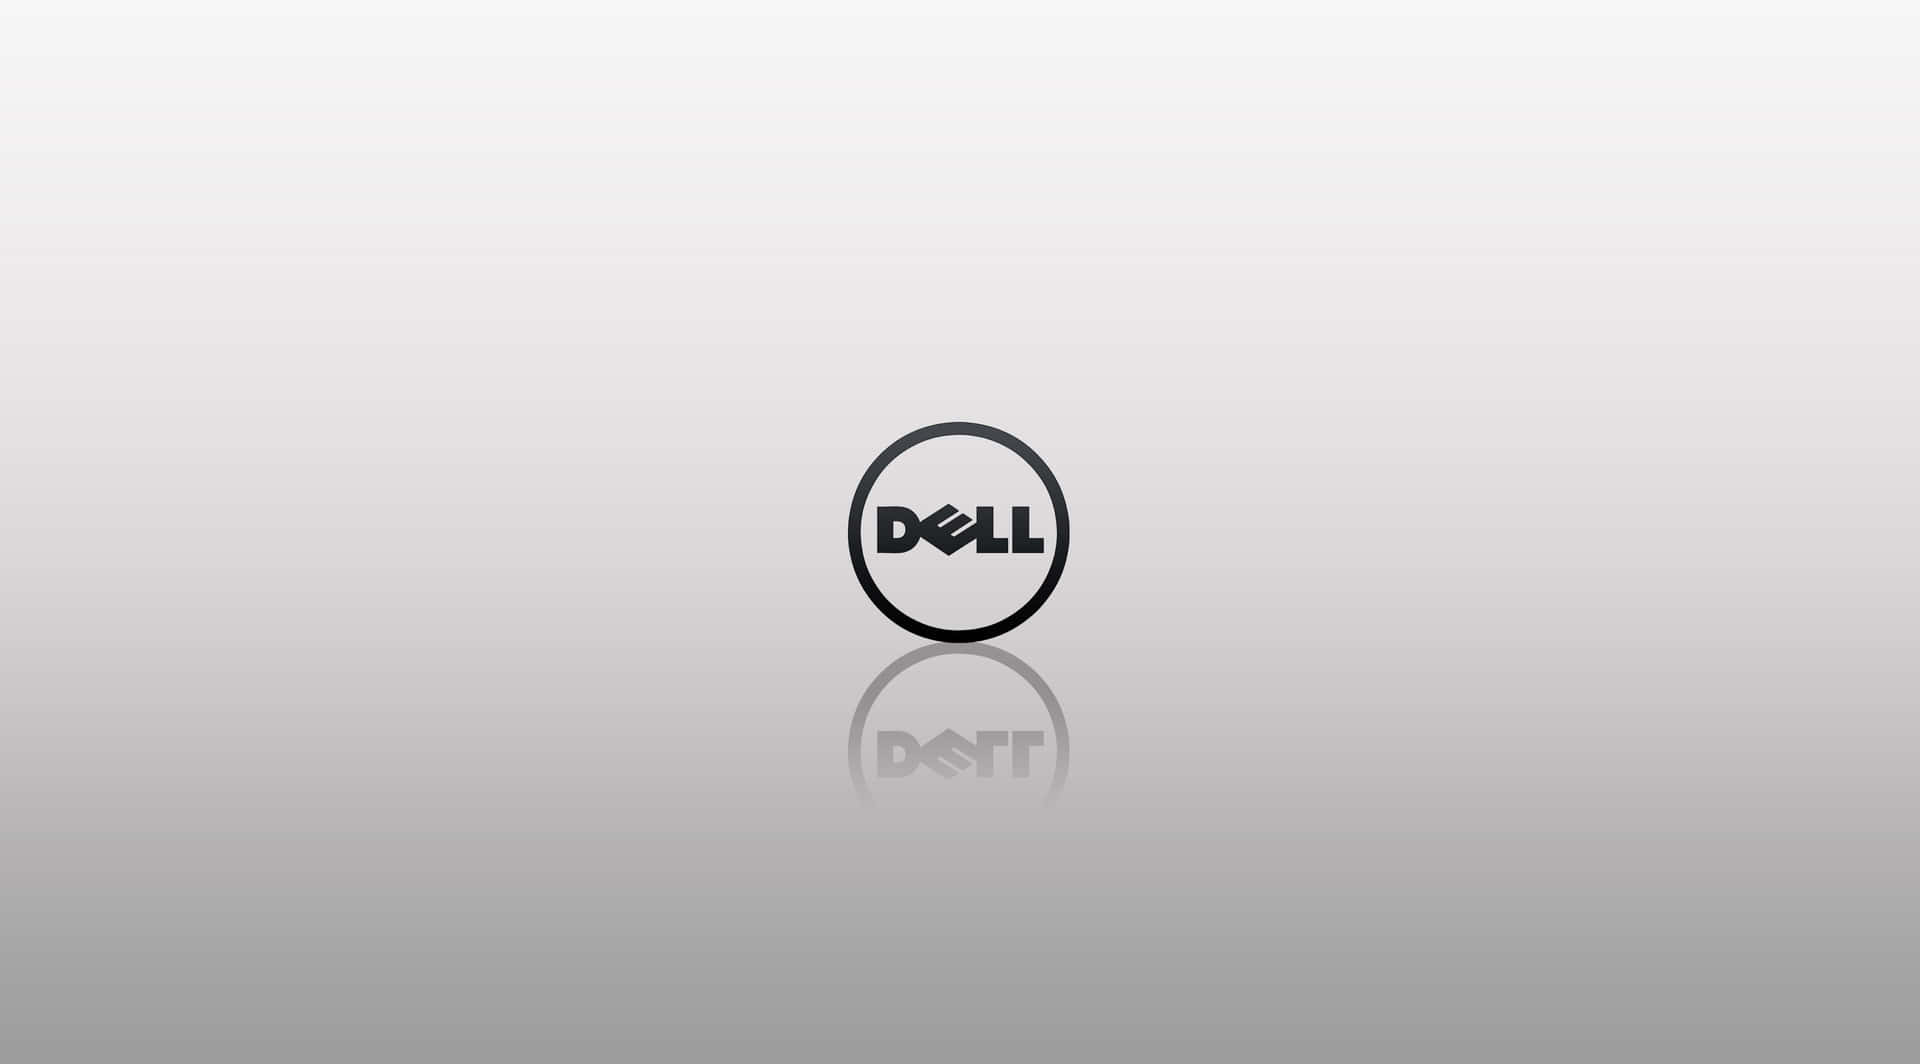 Powerful computers from Dell for maximum performance